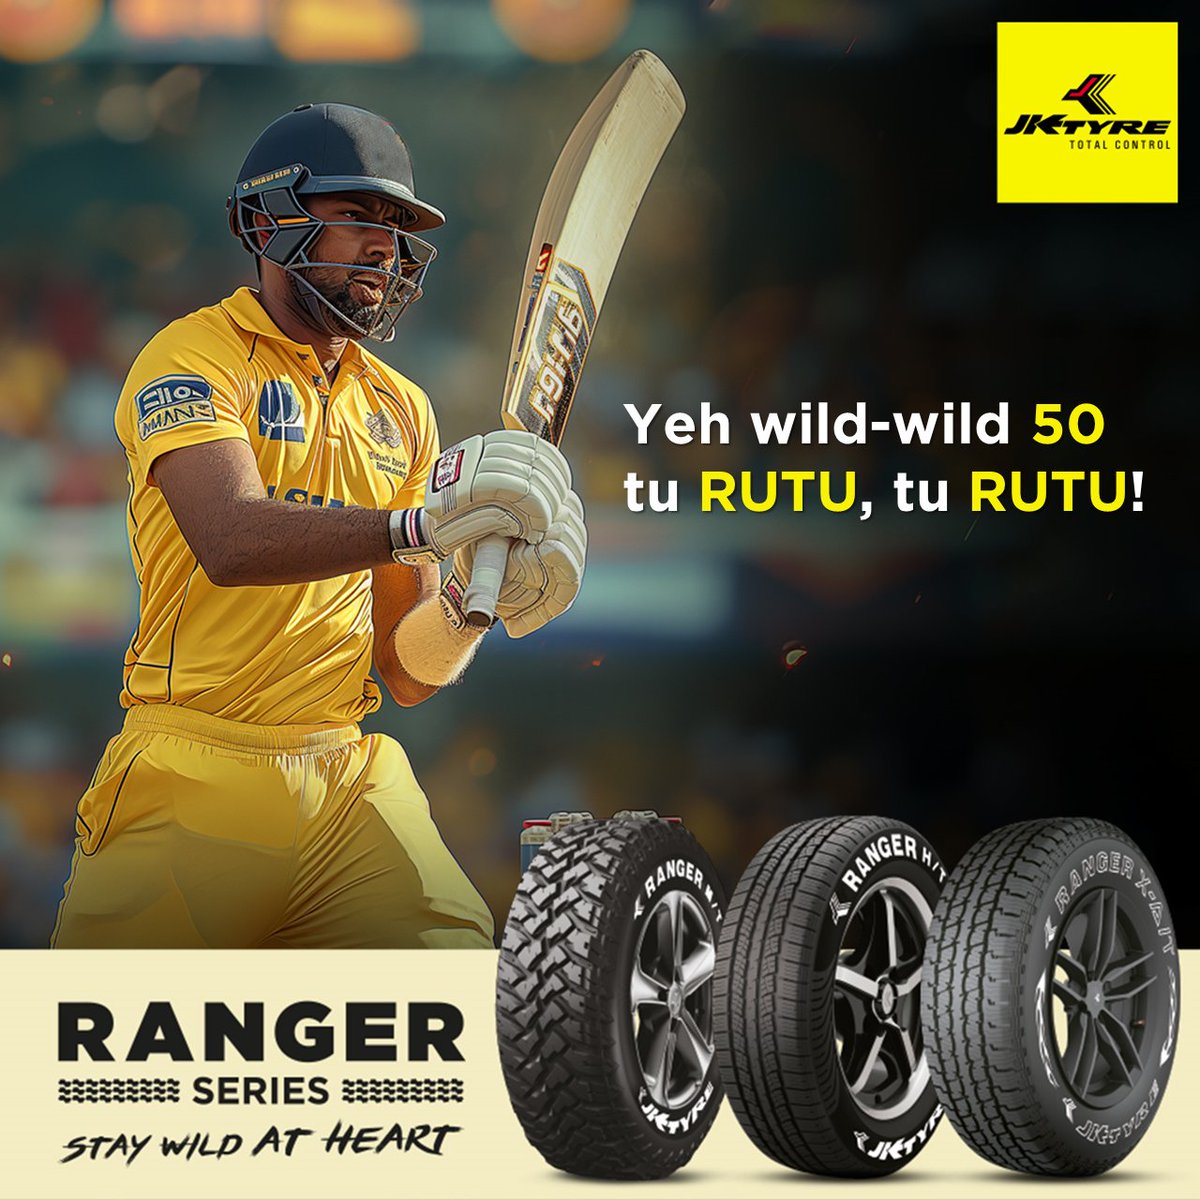 The super skipper is wildly hitting shots left, right and centre! Check out the #RangerSeries from JK Tyre, built for adventures, and multiple terrains, for those who are ‘Wild at Heart’. #JKTyre #IndianT20League #Chennai #Hyderabad